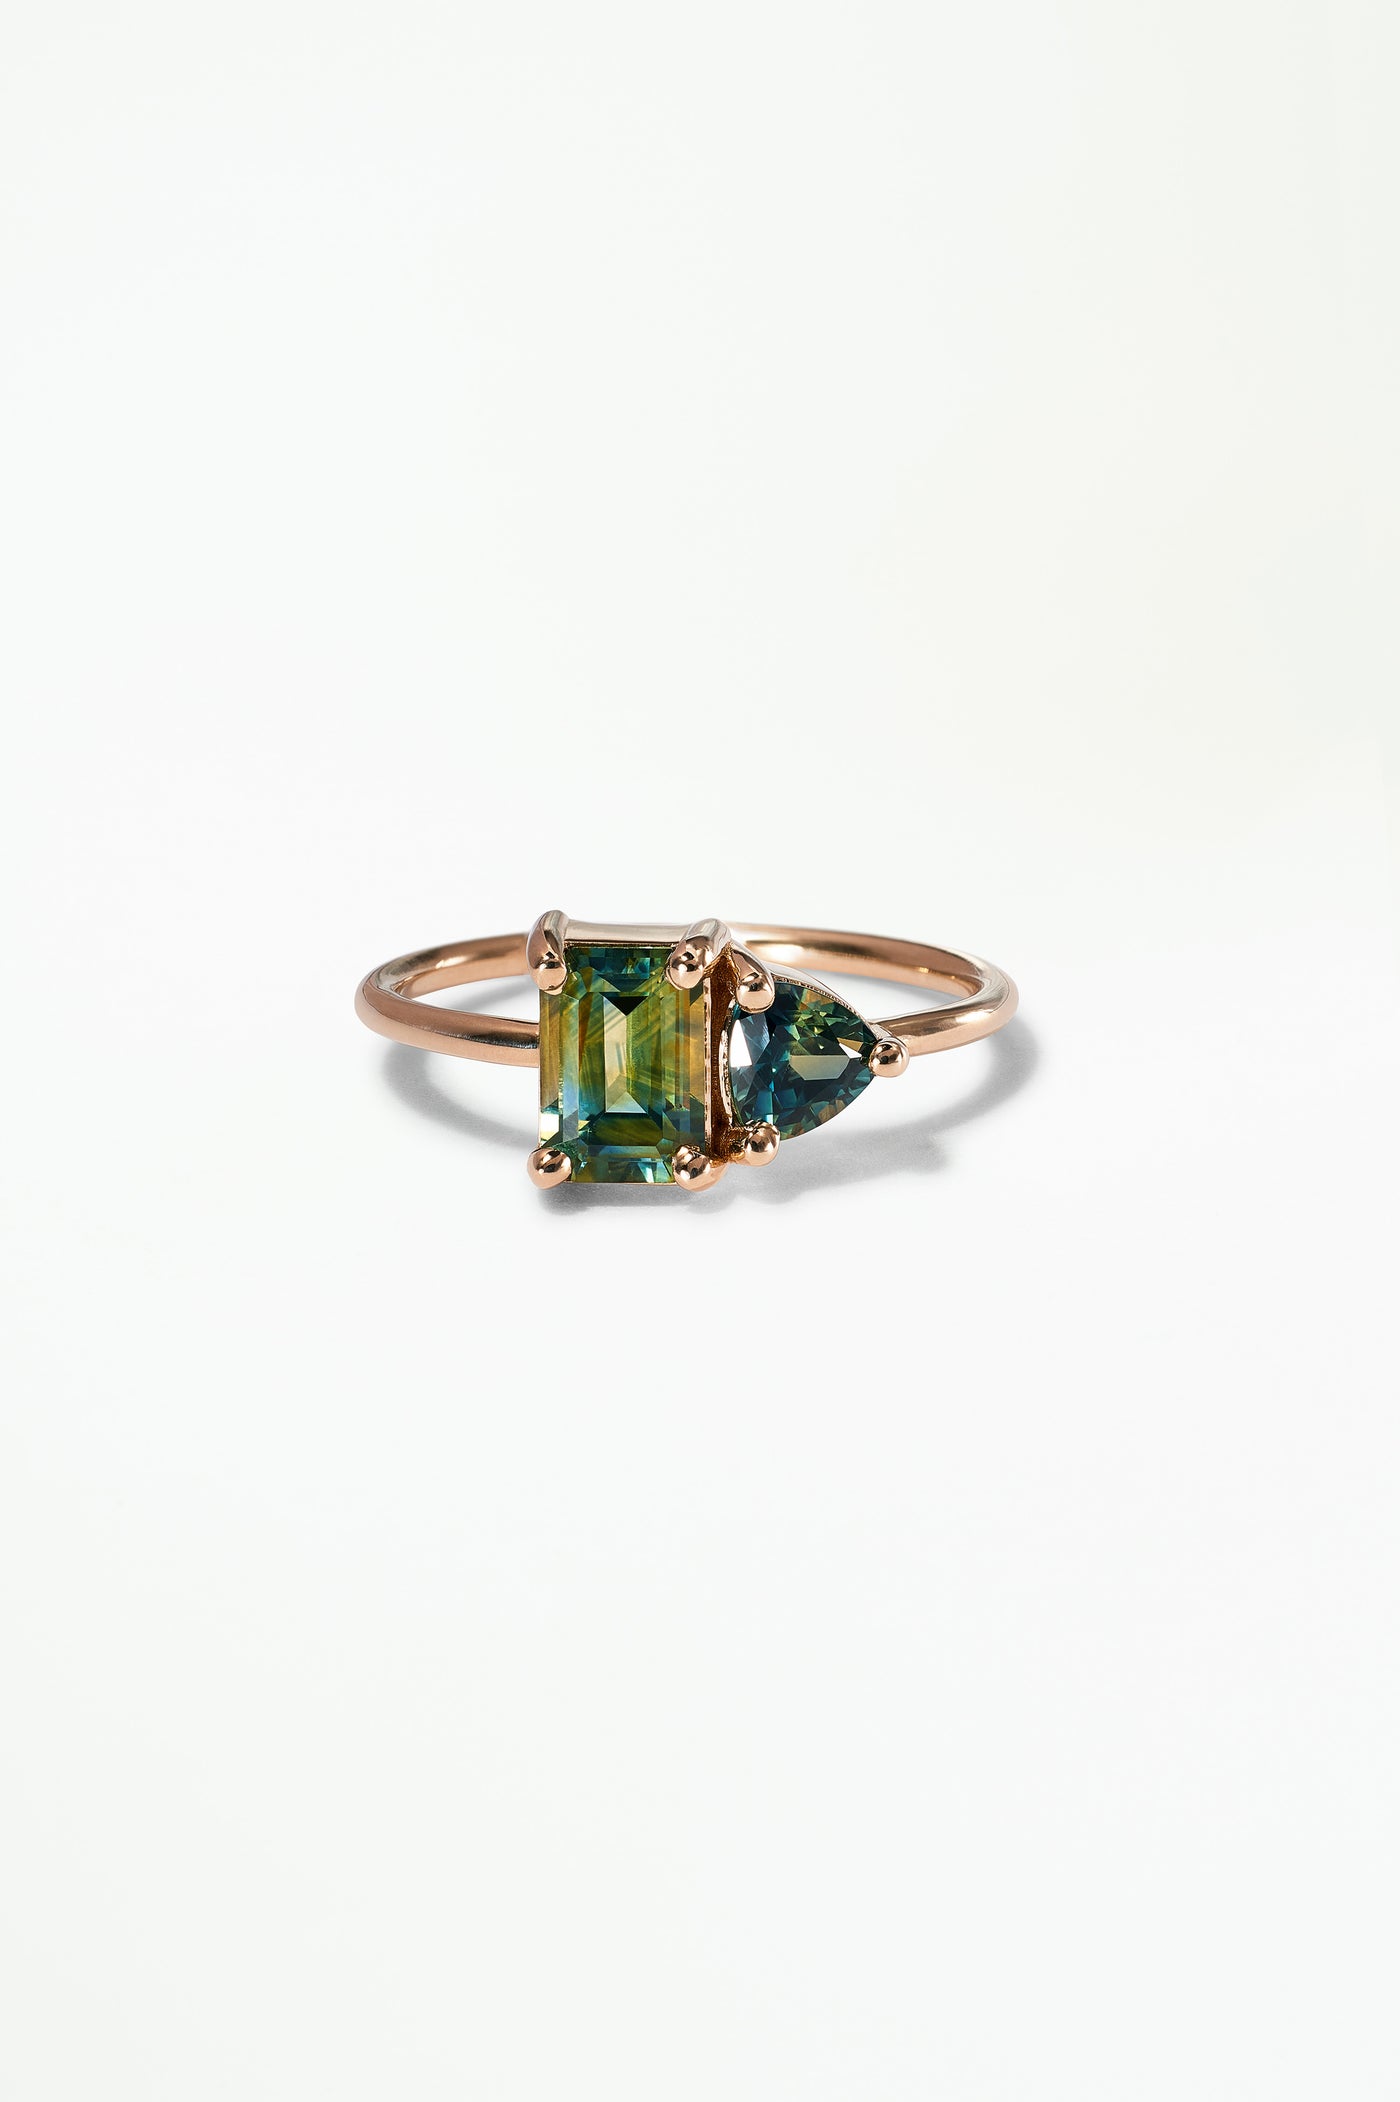 One of a Kind Emerald and Trillion Cut Sapphire Mosaic Ring No. 42